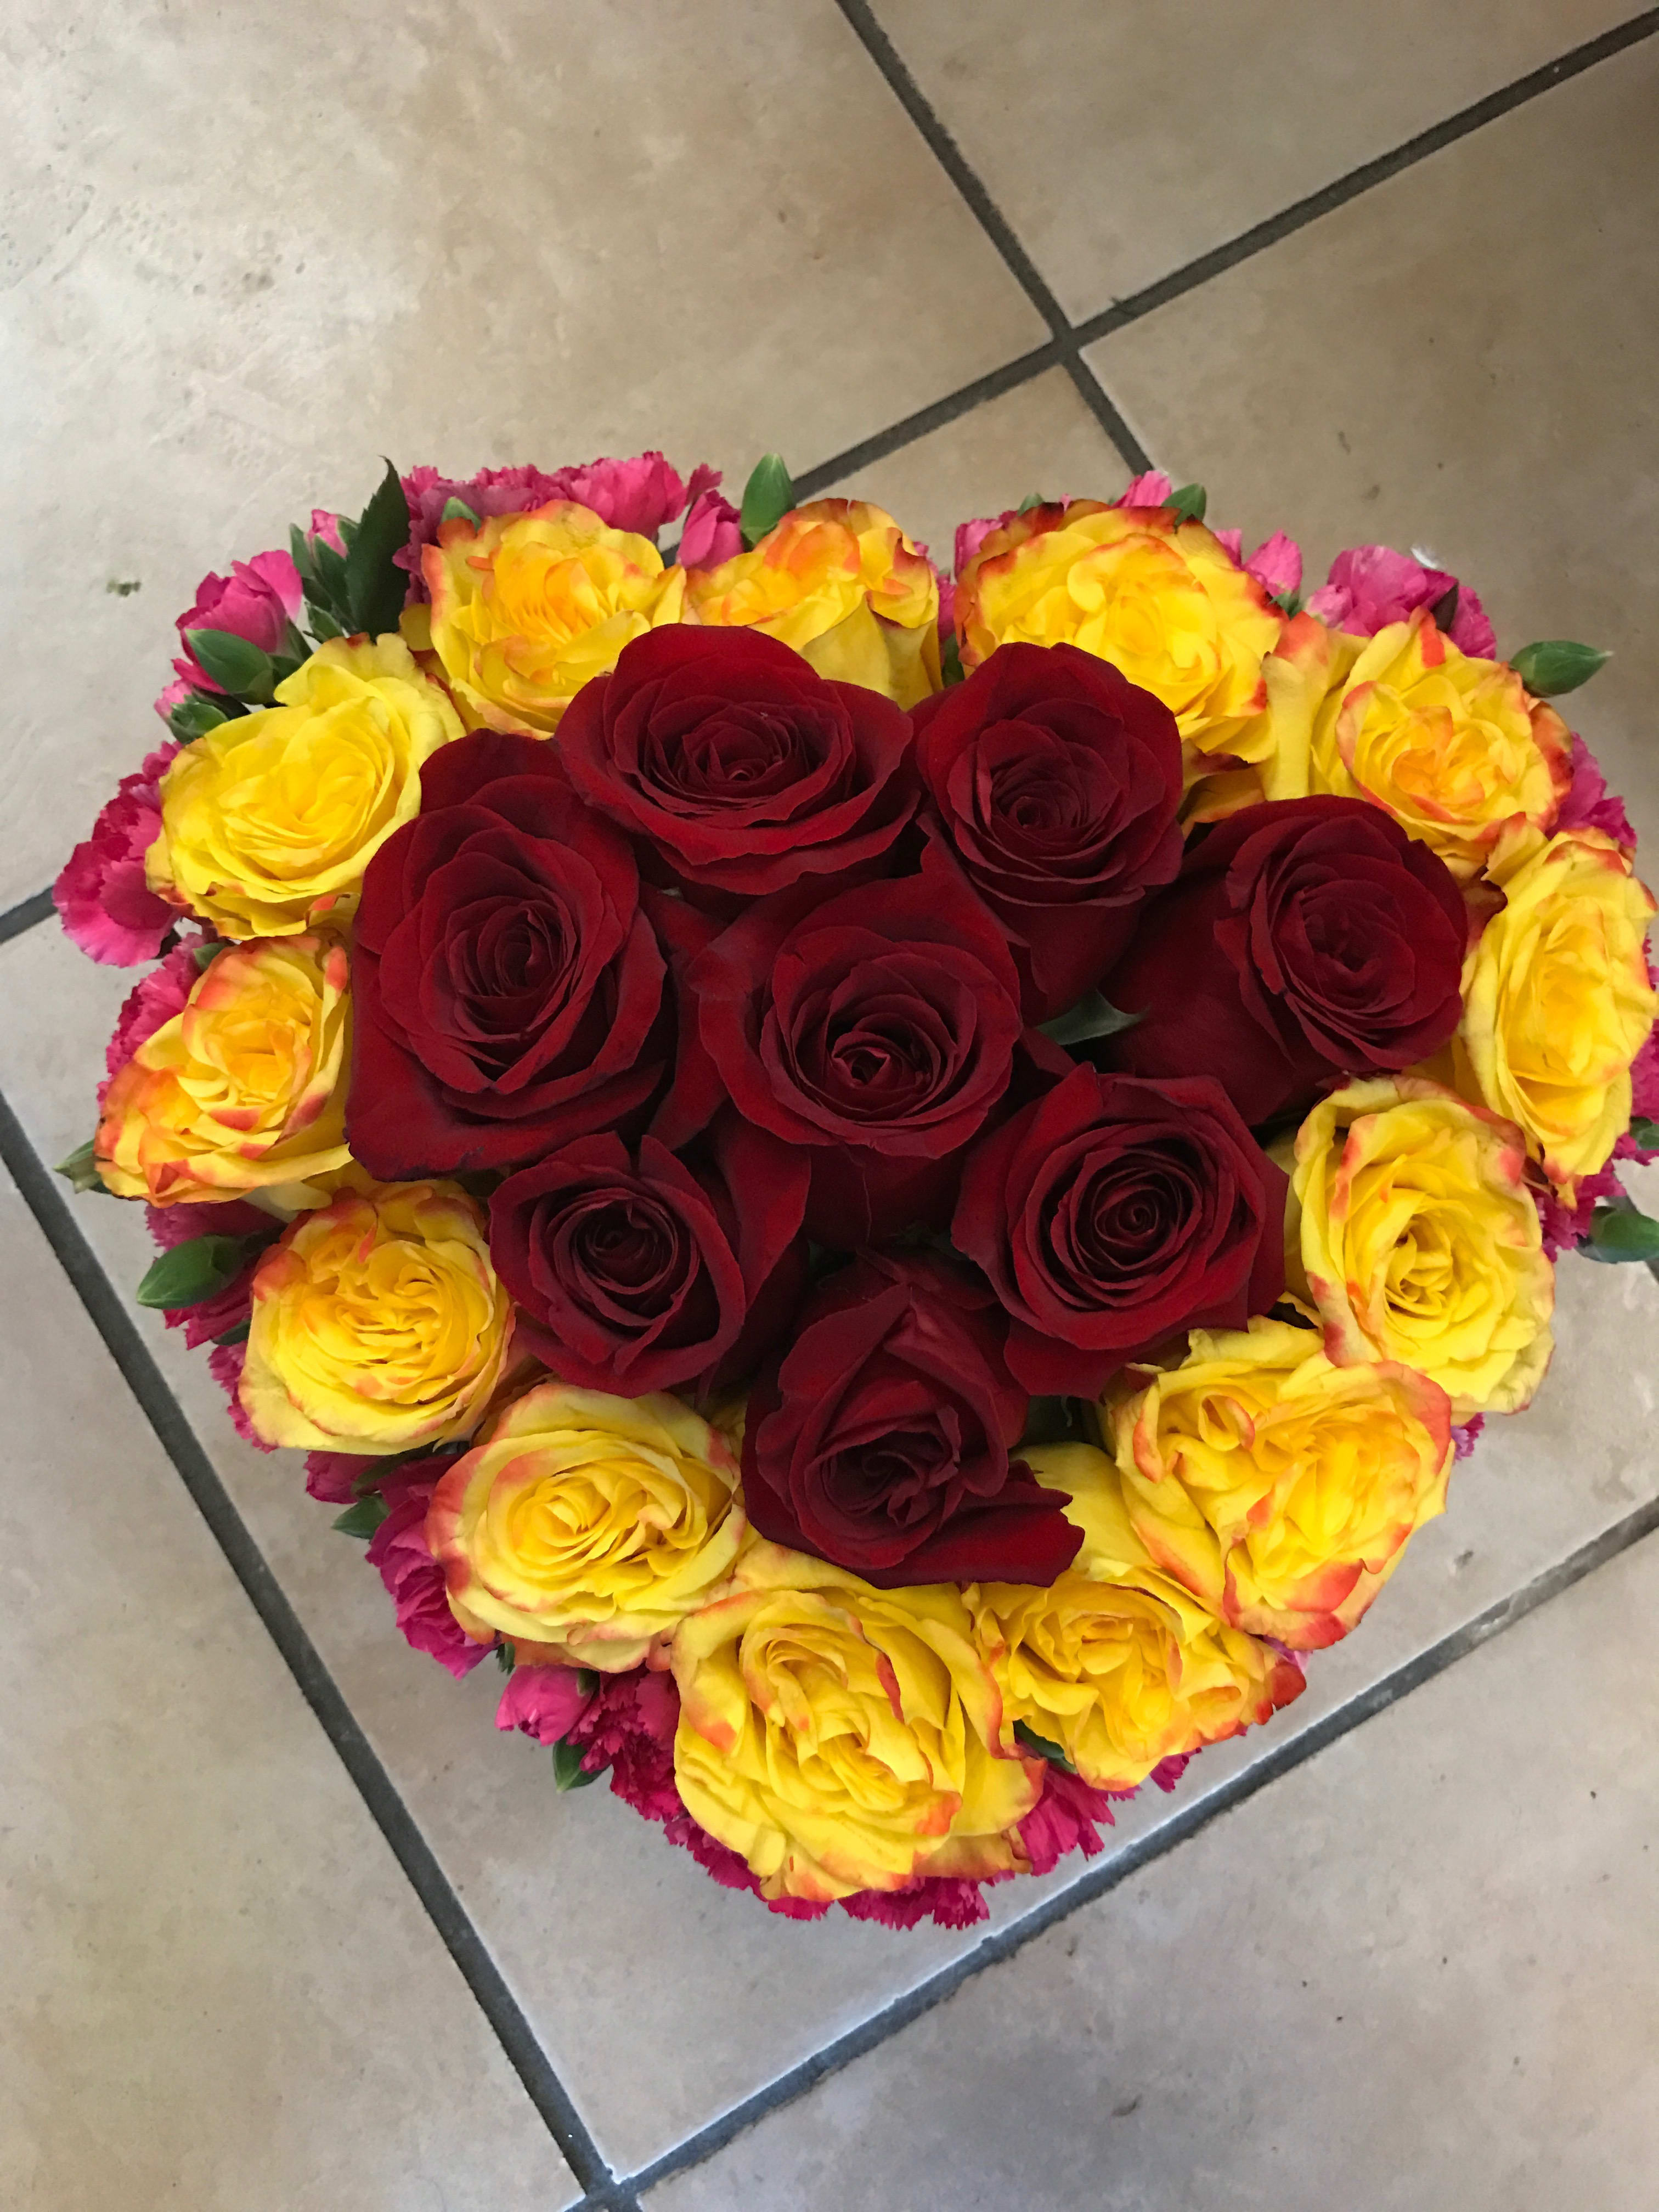 Small Heart Shaped Arangment  - This beautiful heart shaped arrangement really shows your love for someone with bursting colors. Roses and carnations mix beautifully to showcase this amazing arrangement 